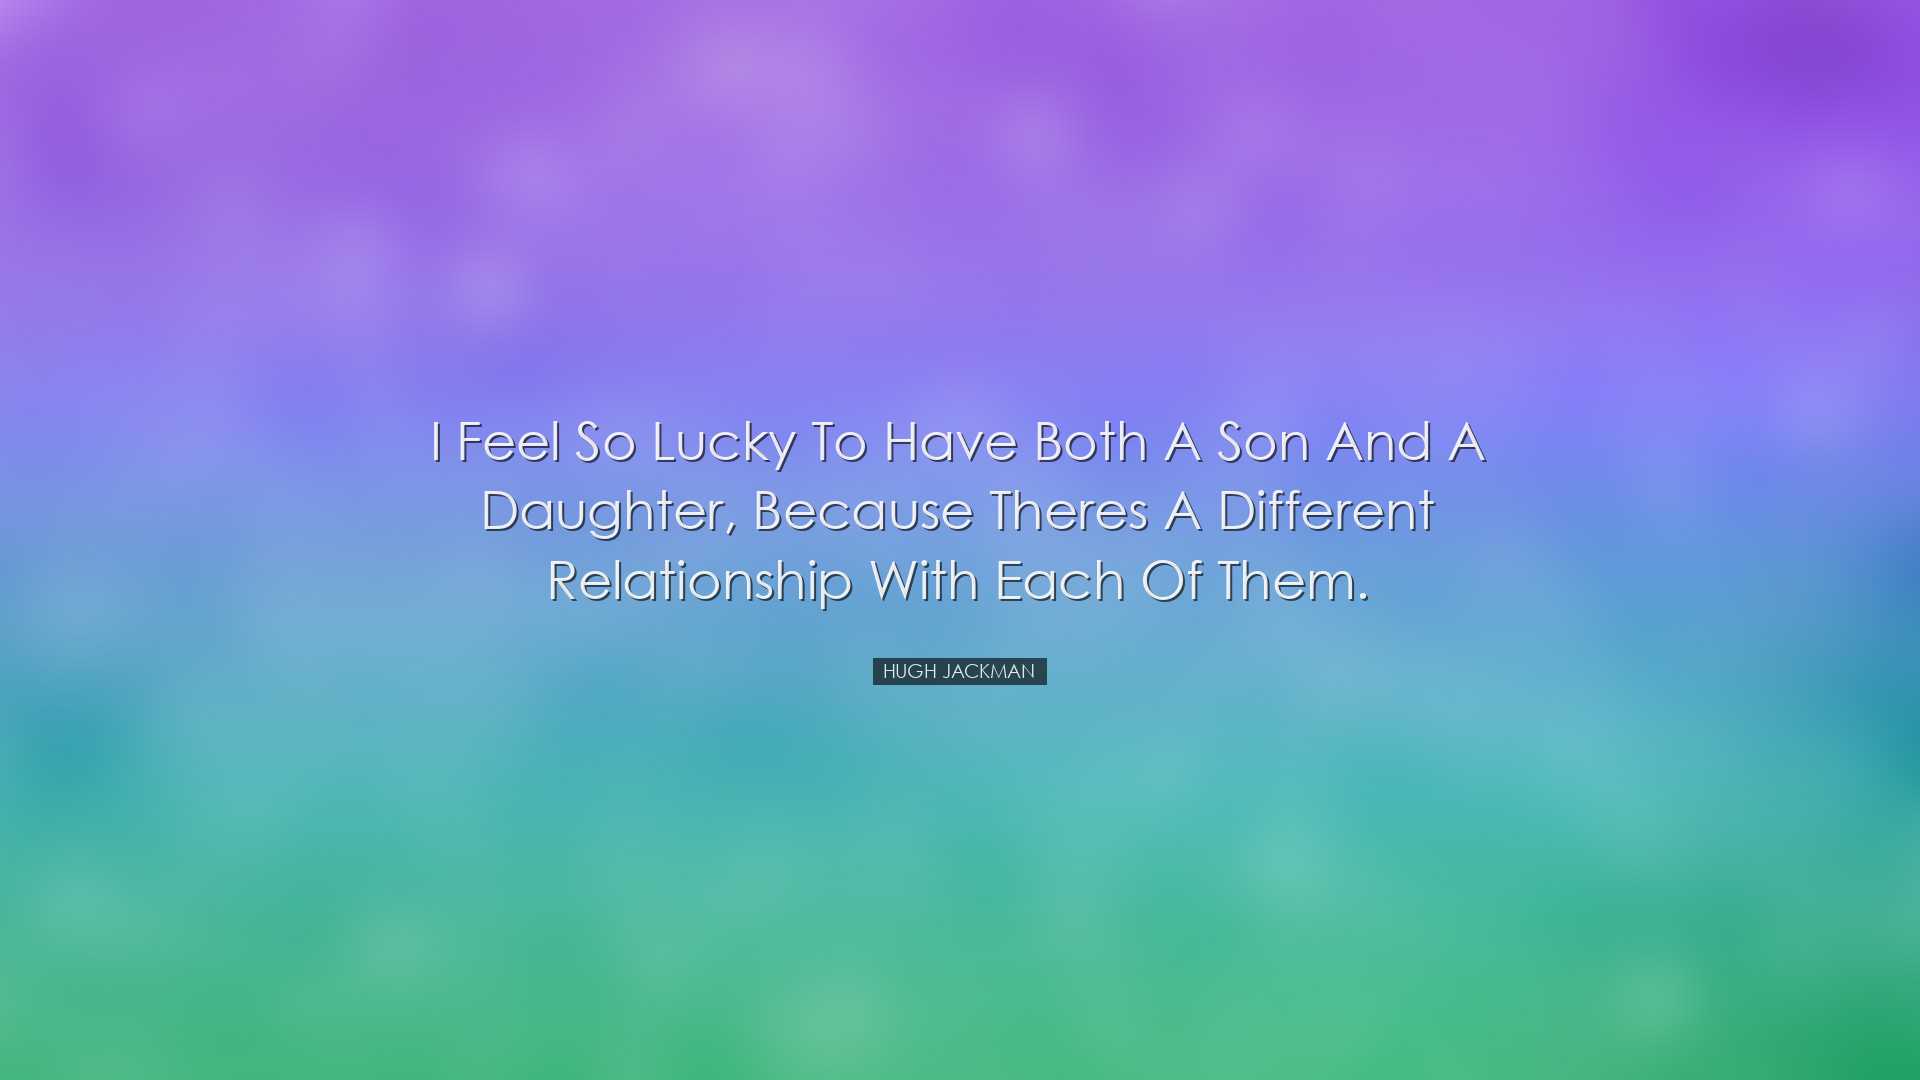 I feel so lucky to have both a son and a daughter, because theres